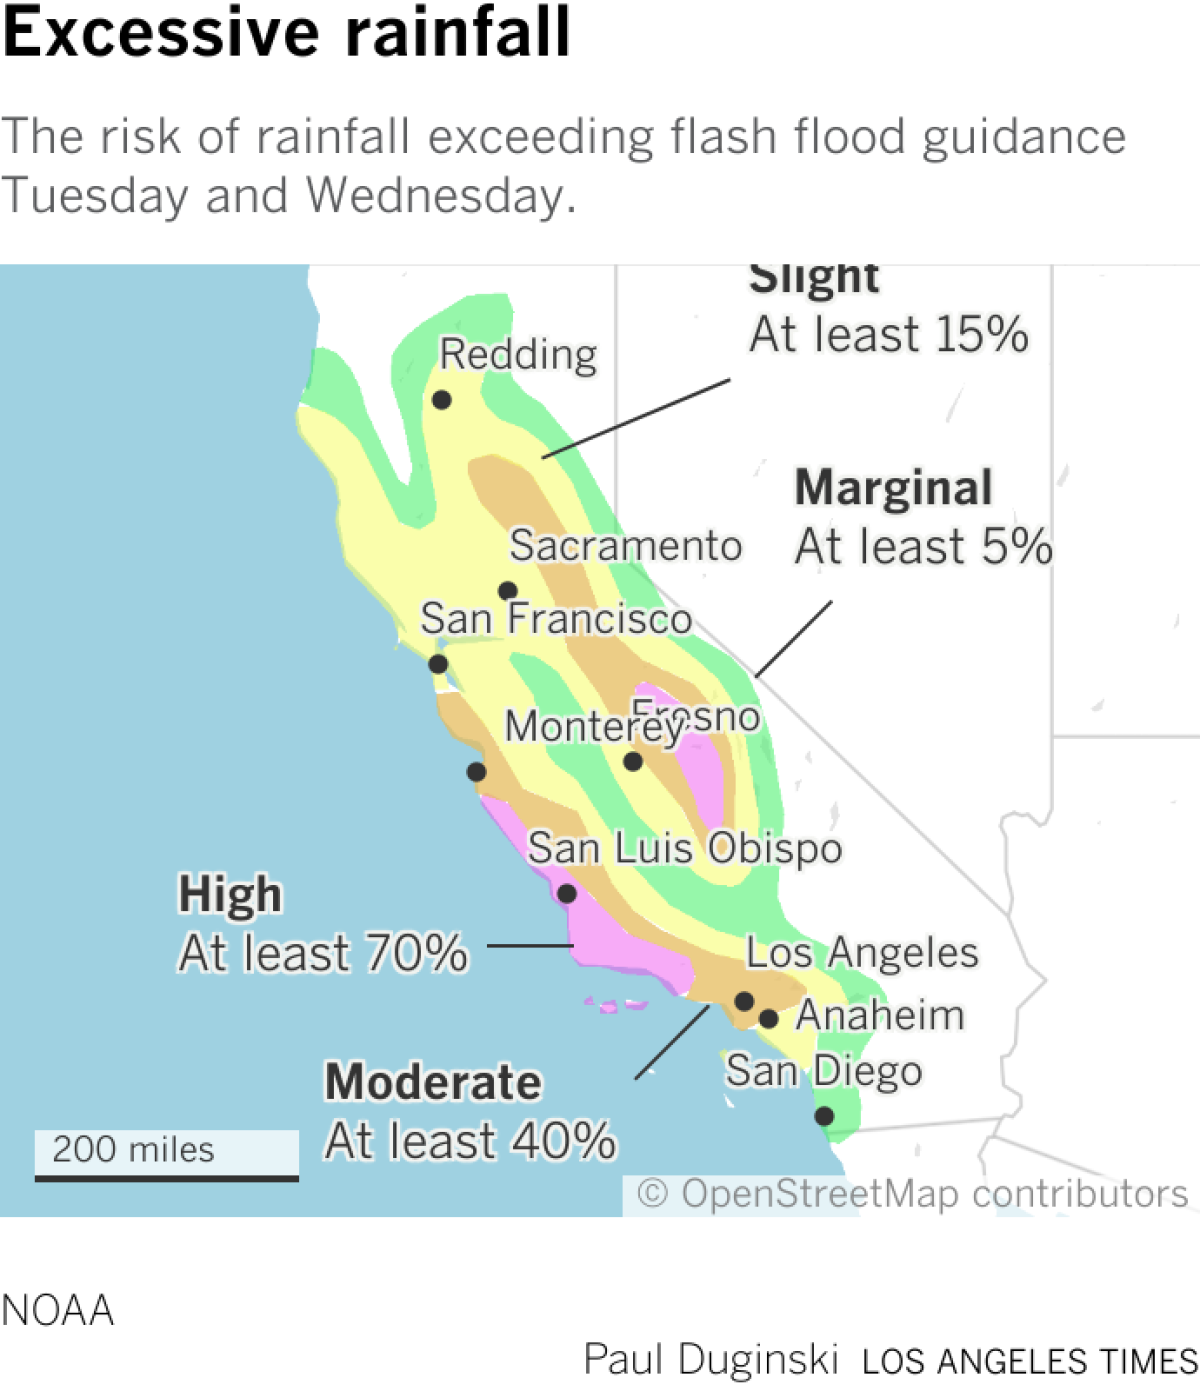 Areas of California at risk of exceeding flash flood guidance